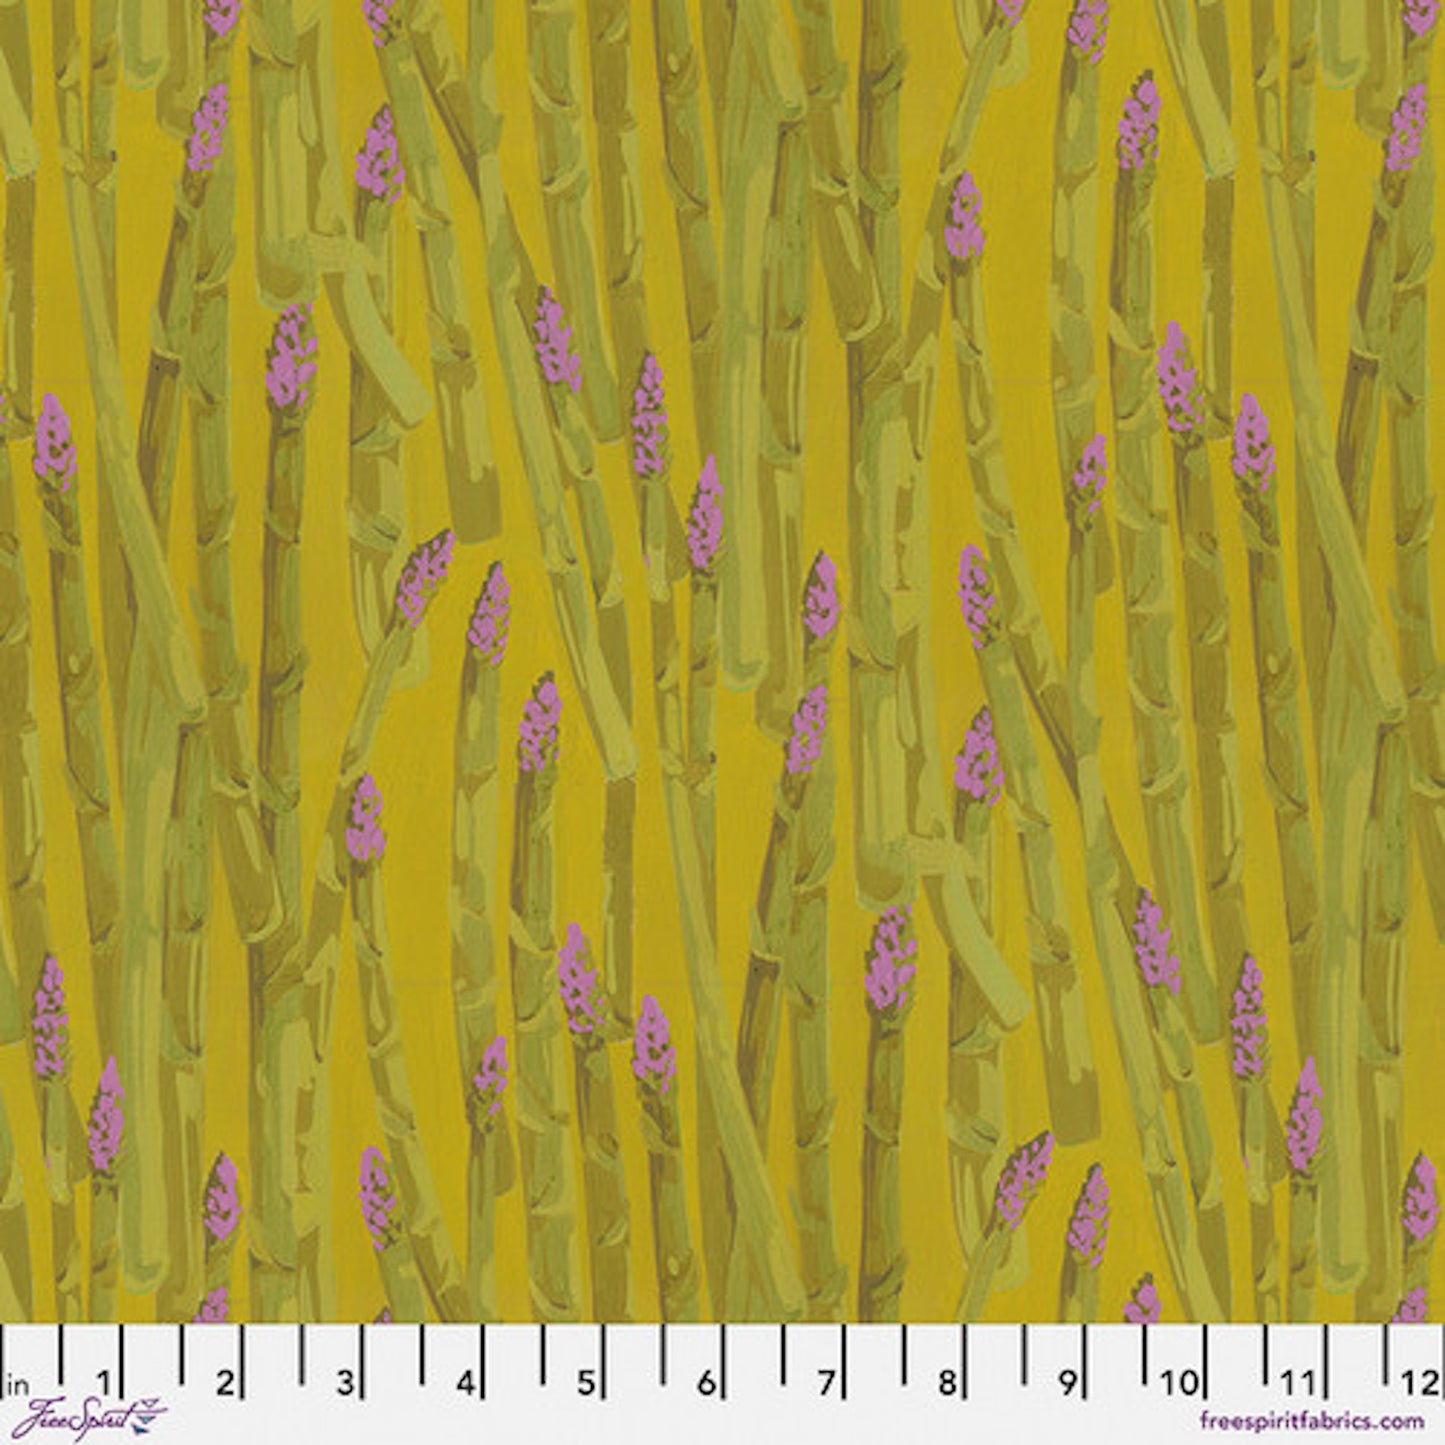 Garden- Gold Asparagus Stripe: Sold by the 1/2 yard.